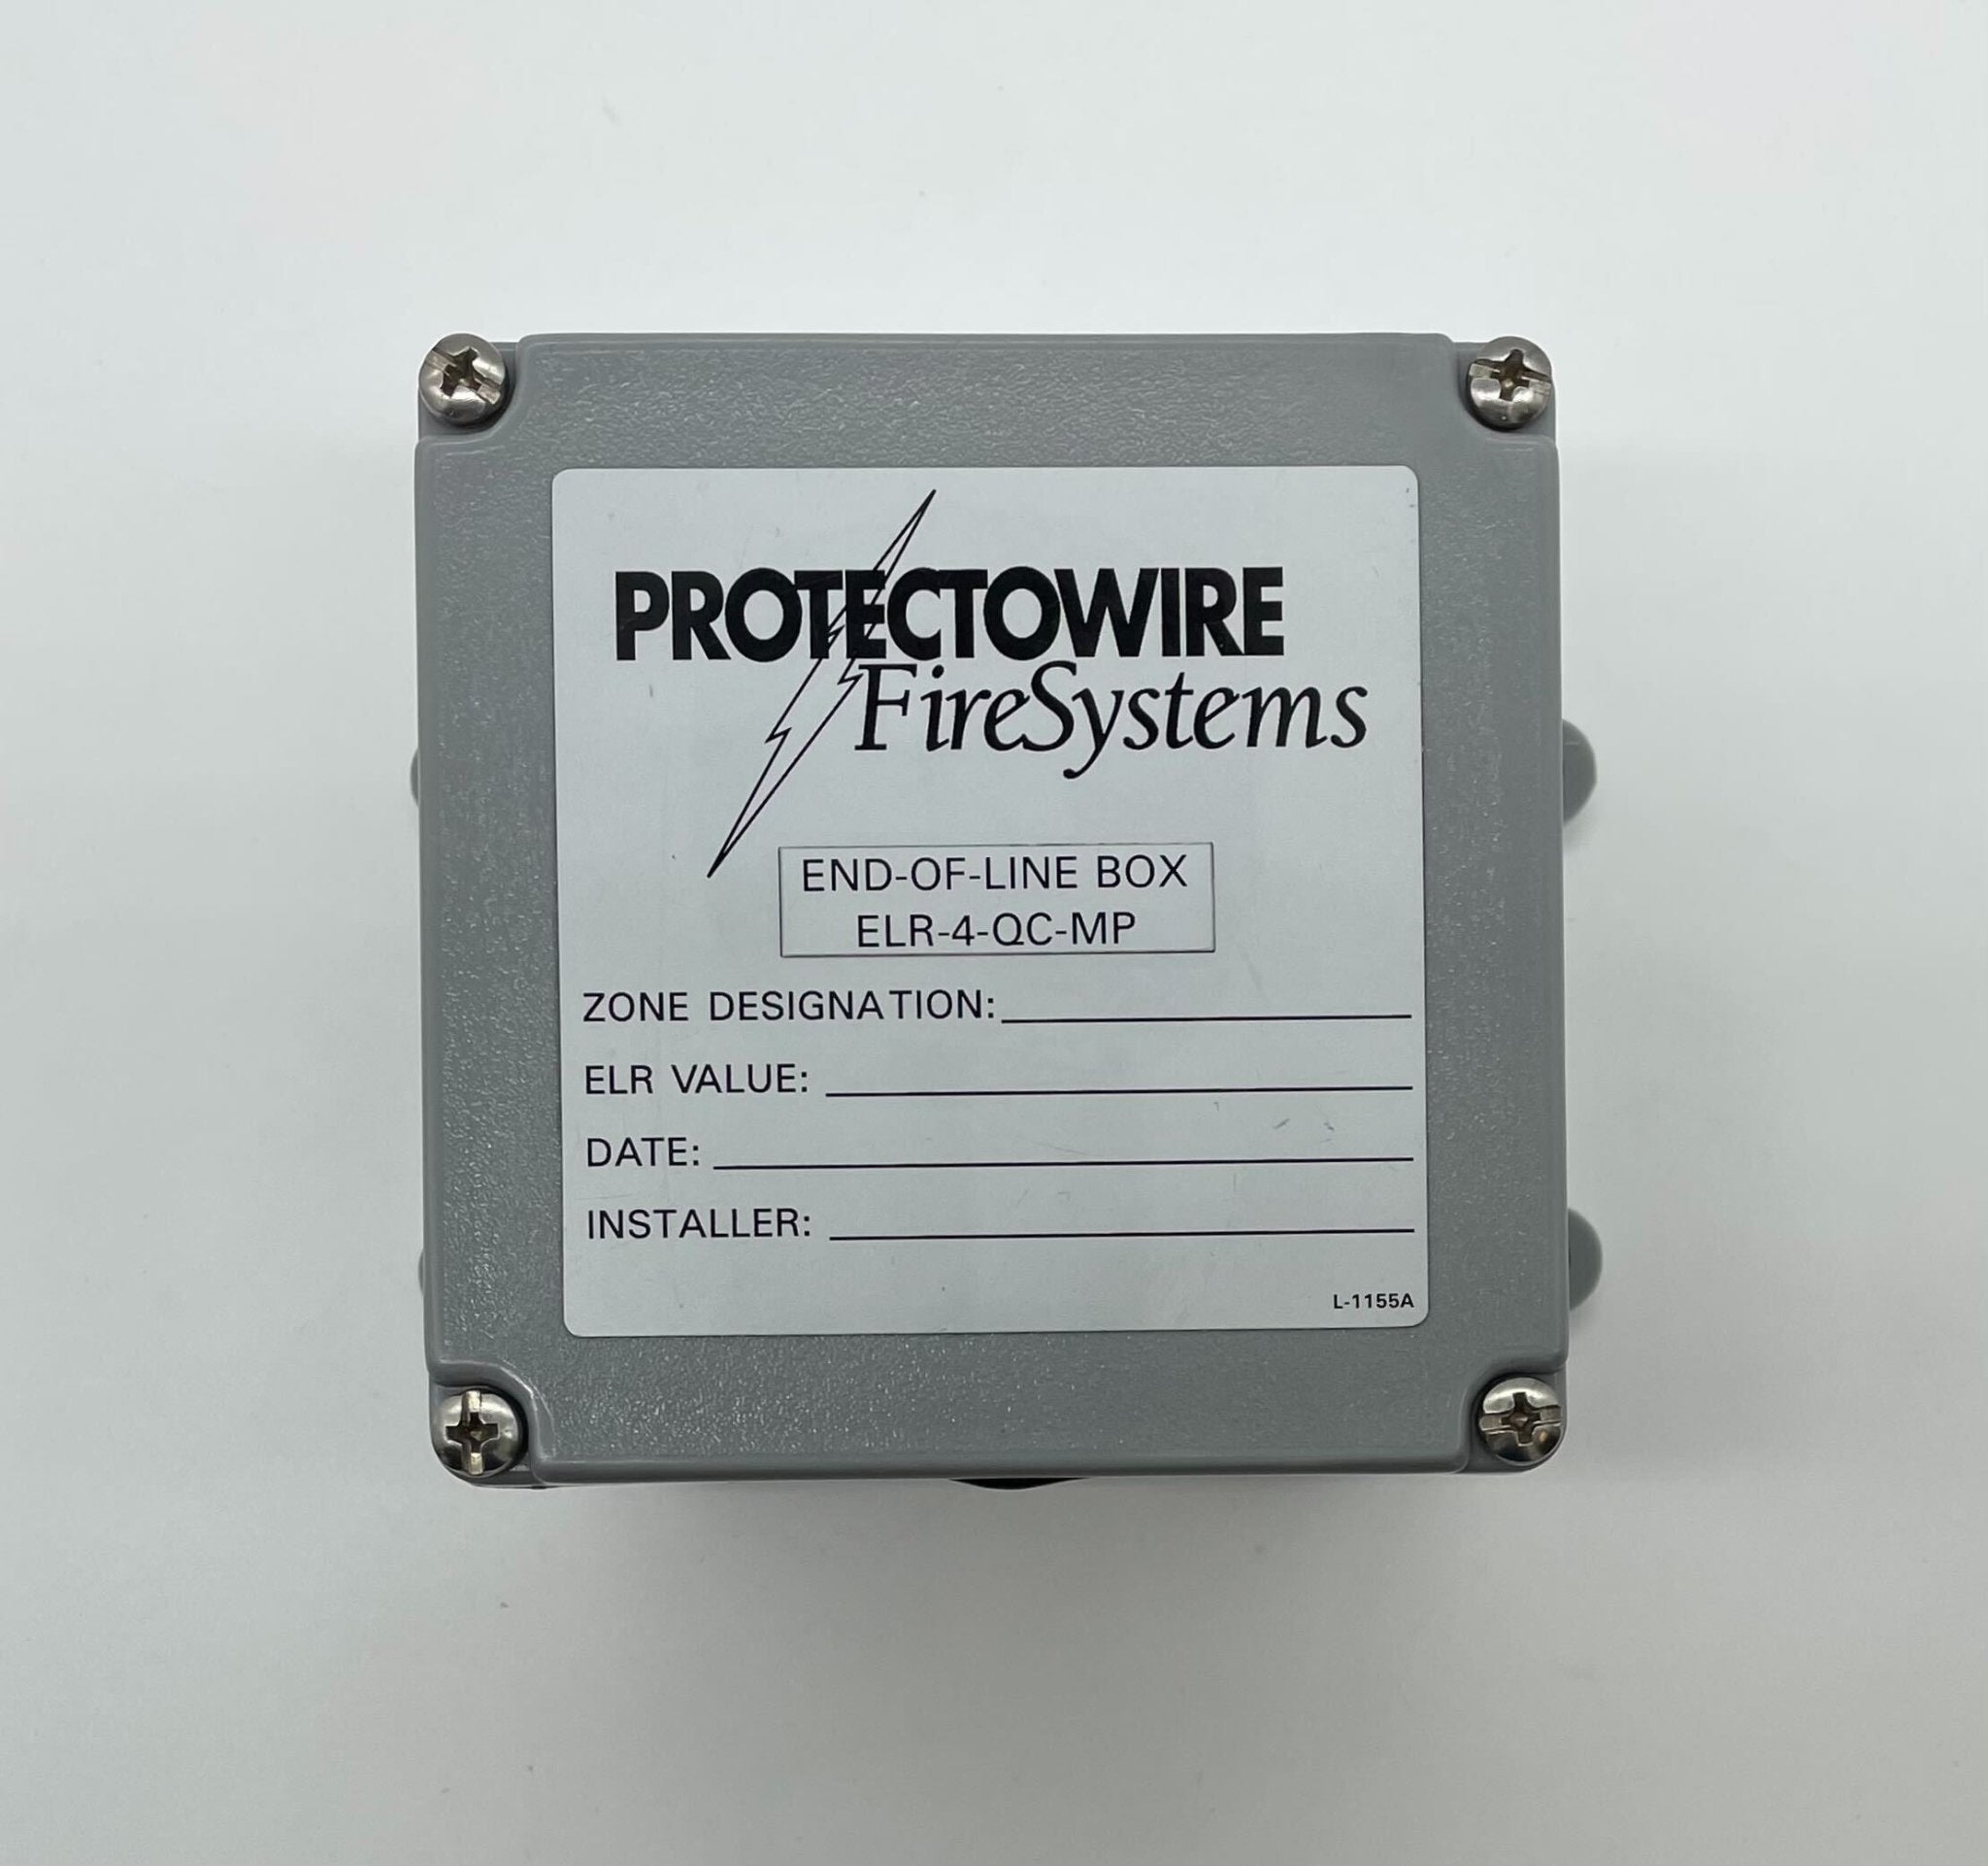 Protectowire ELR-4-QC-MP - The Fire Alarm Supplier